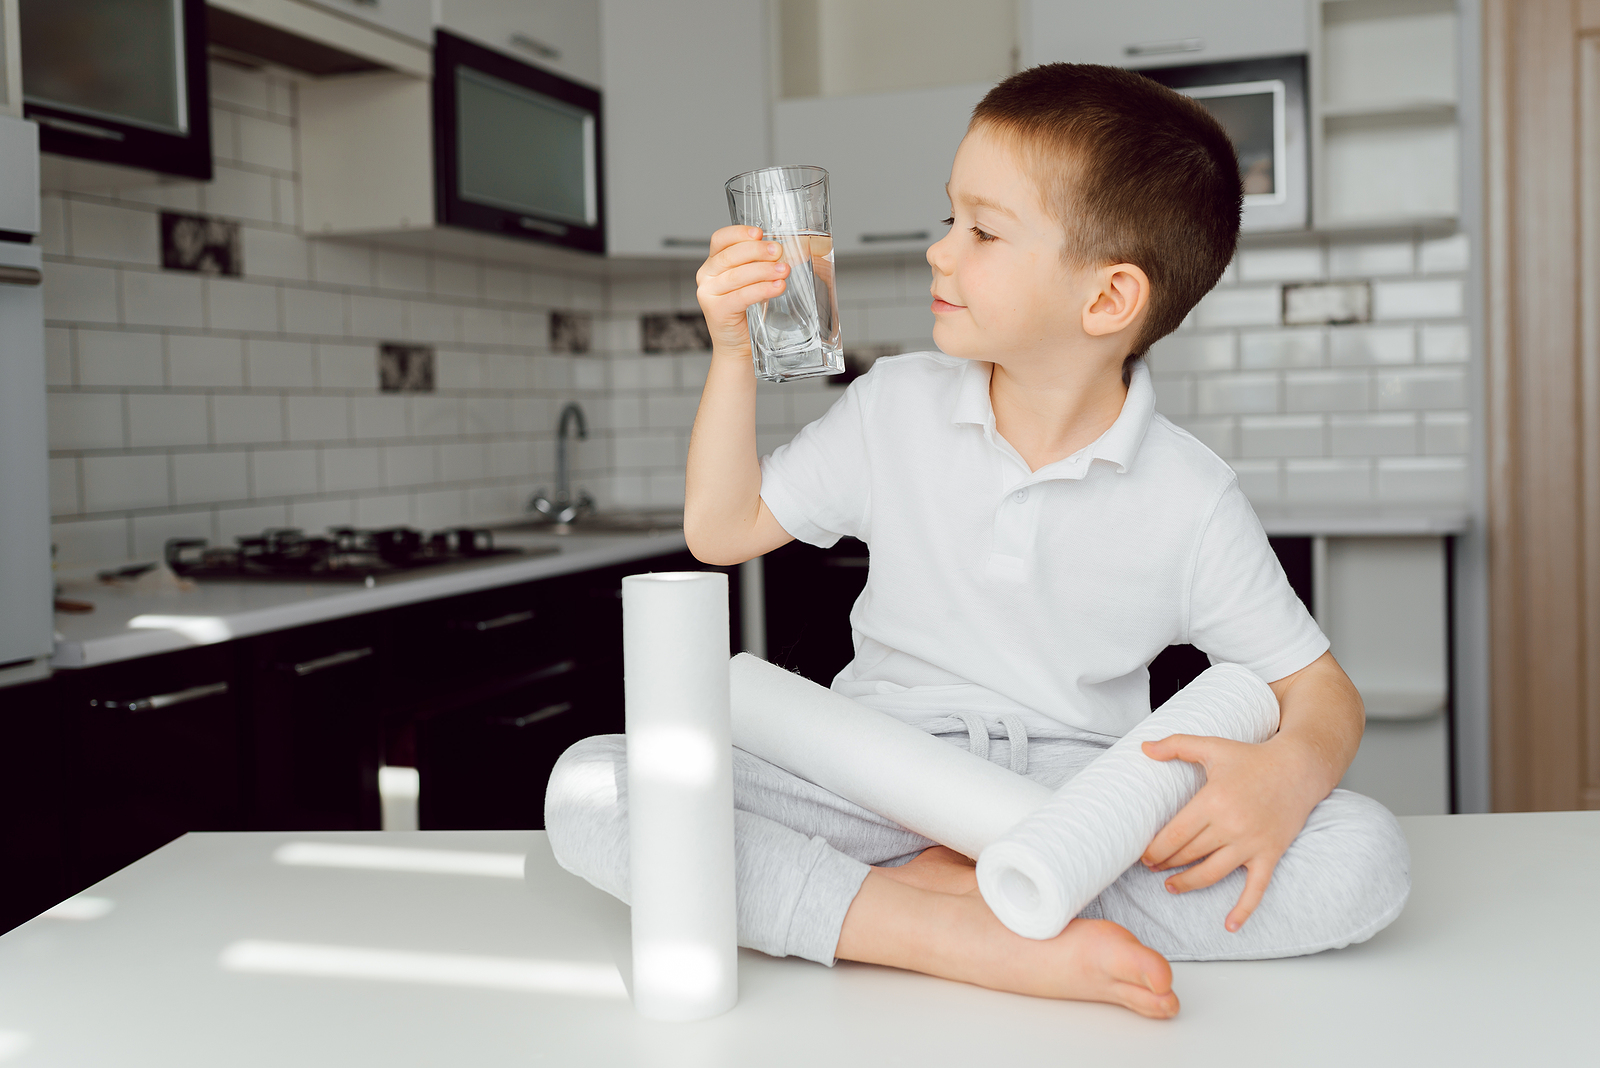 Spring Water vs. Purified Water: Which is the Higher Alternative?